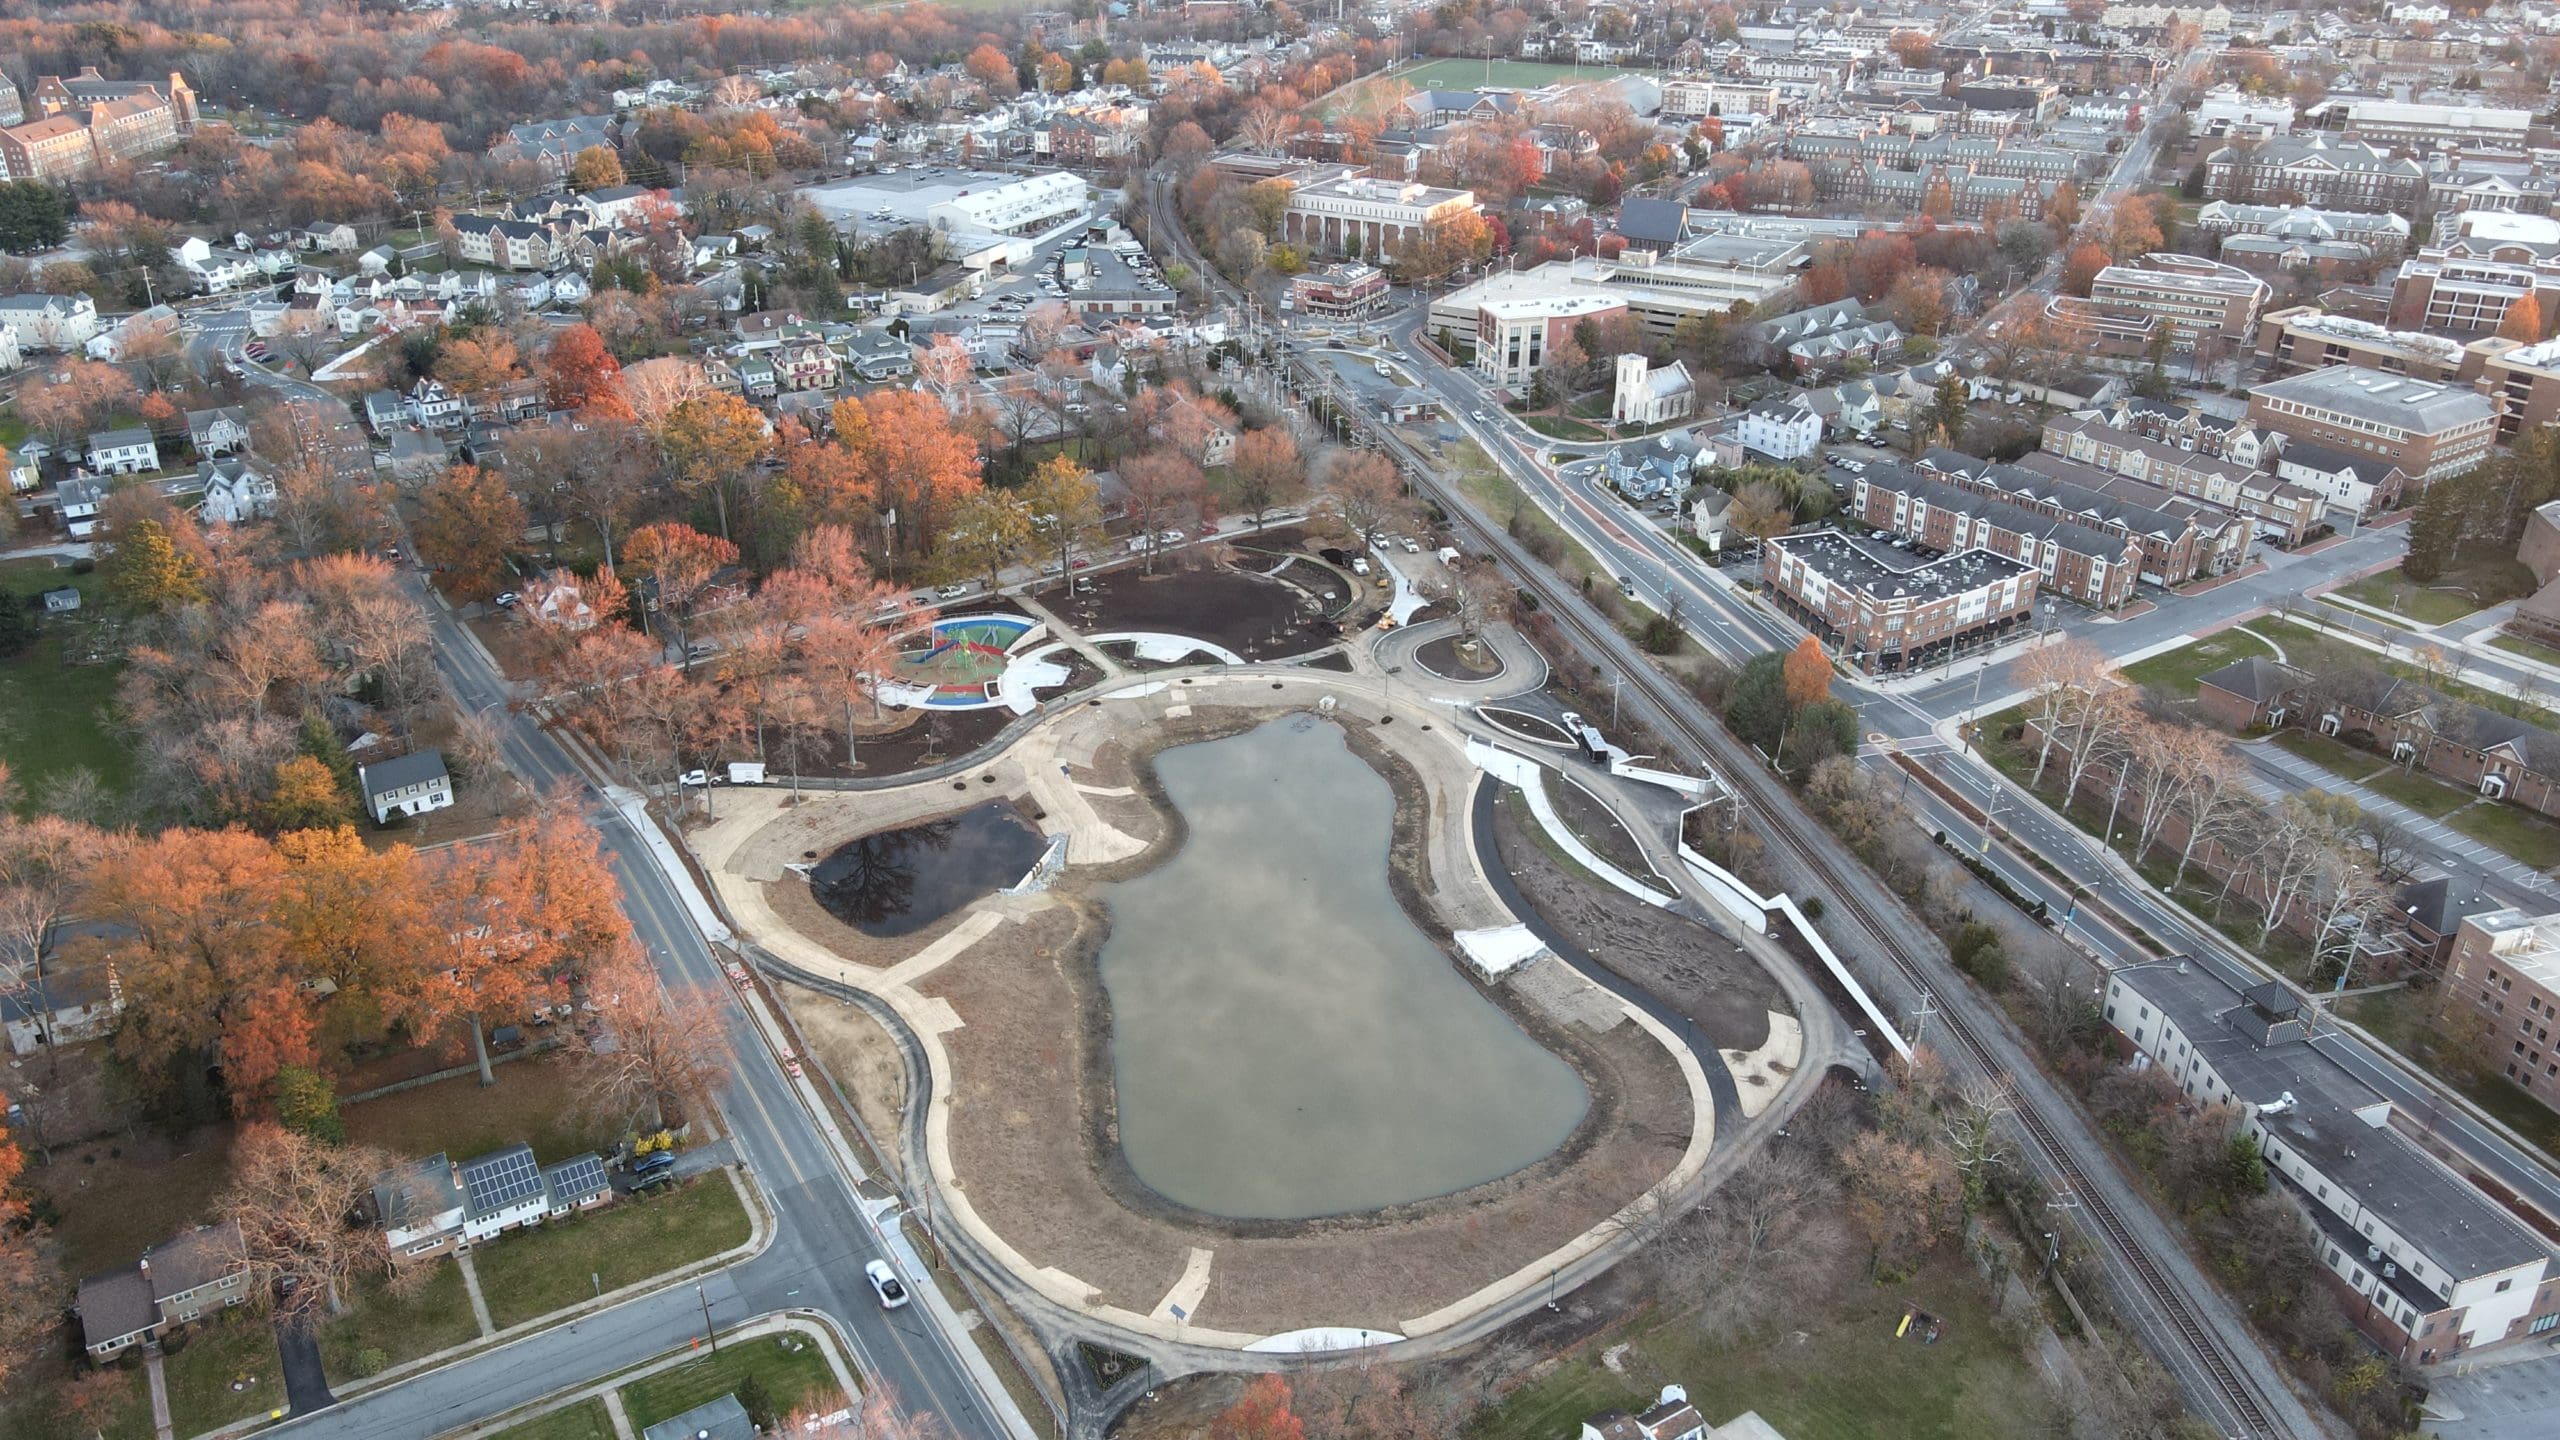 Featured image for “Goodbye, Rodney dorms. Hello, Hillside Park’s play areas, fishing, trail”